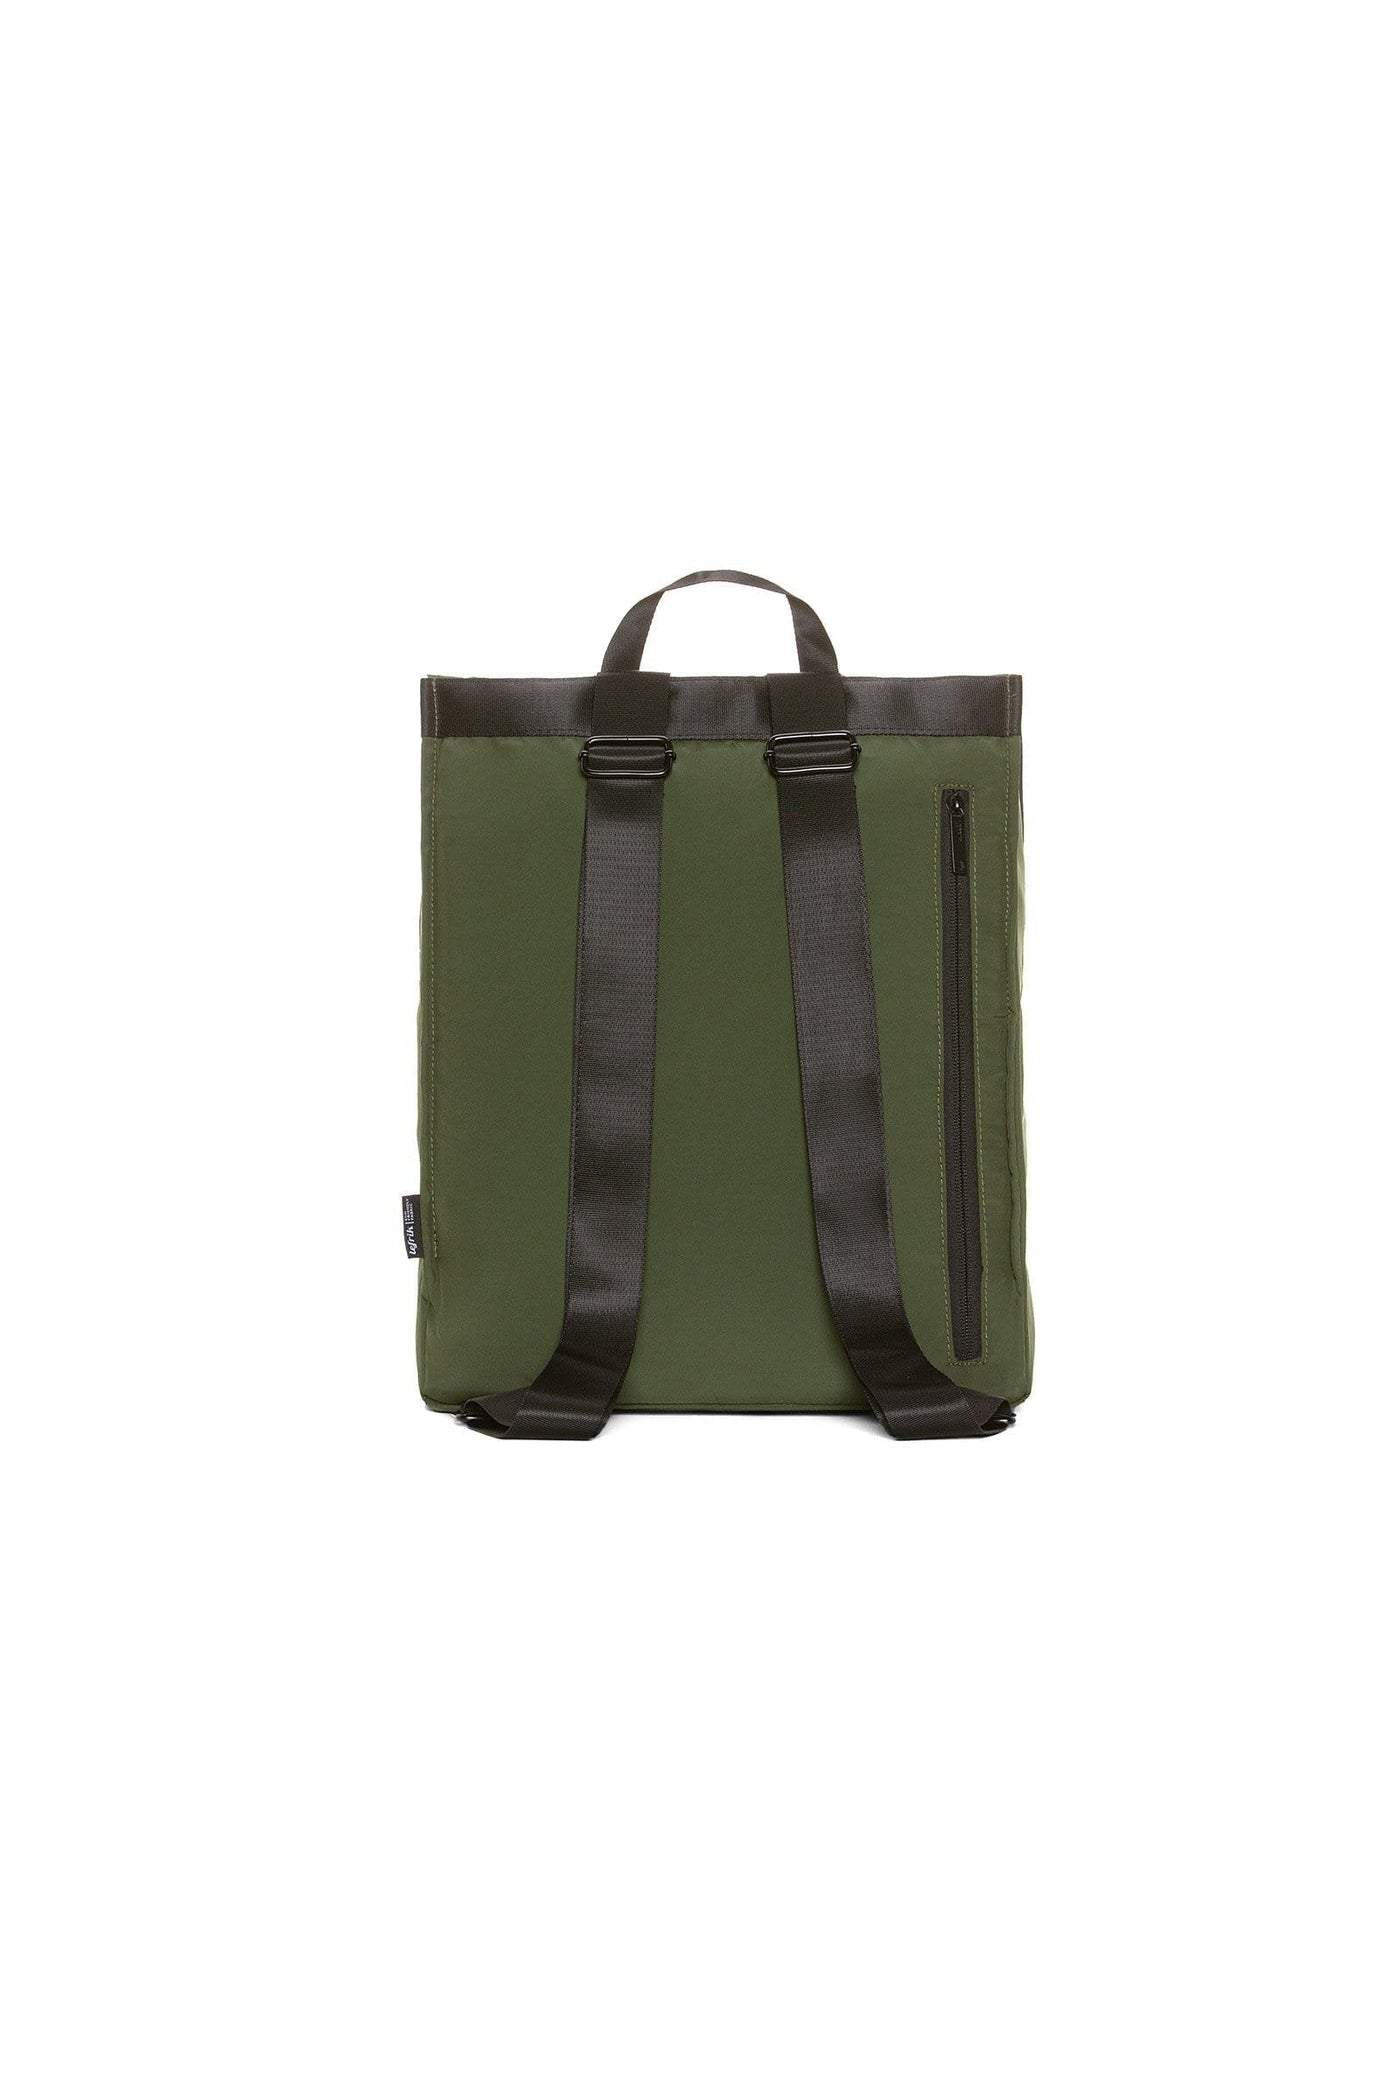 LeFrik Handy Tech Backpack-Accessories-Ohh! By Gum - Shop Sustainable